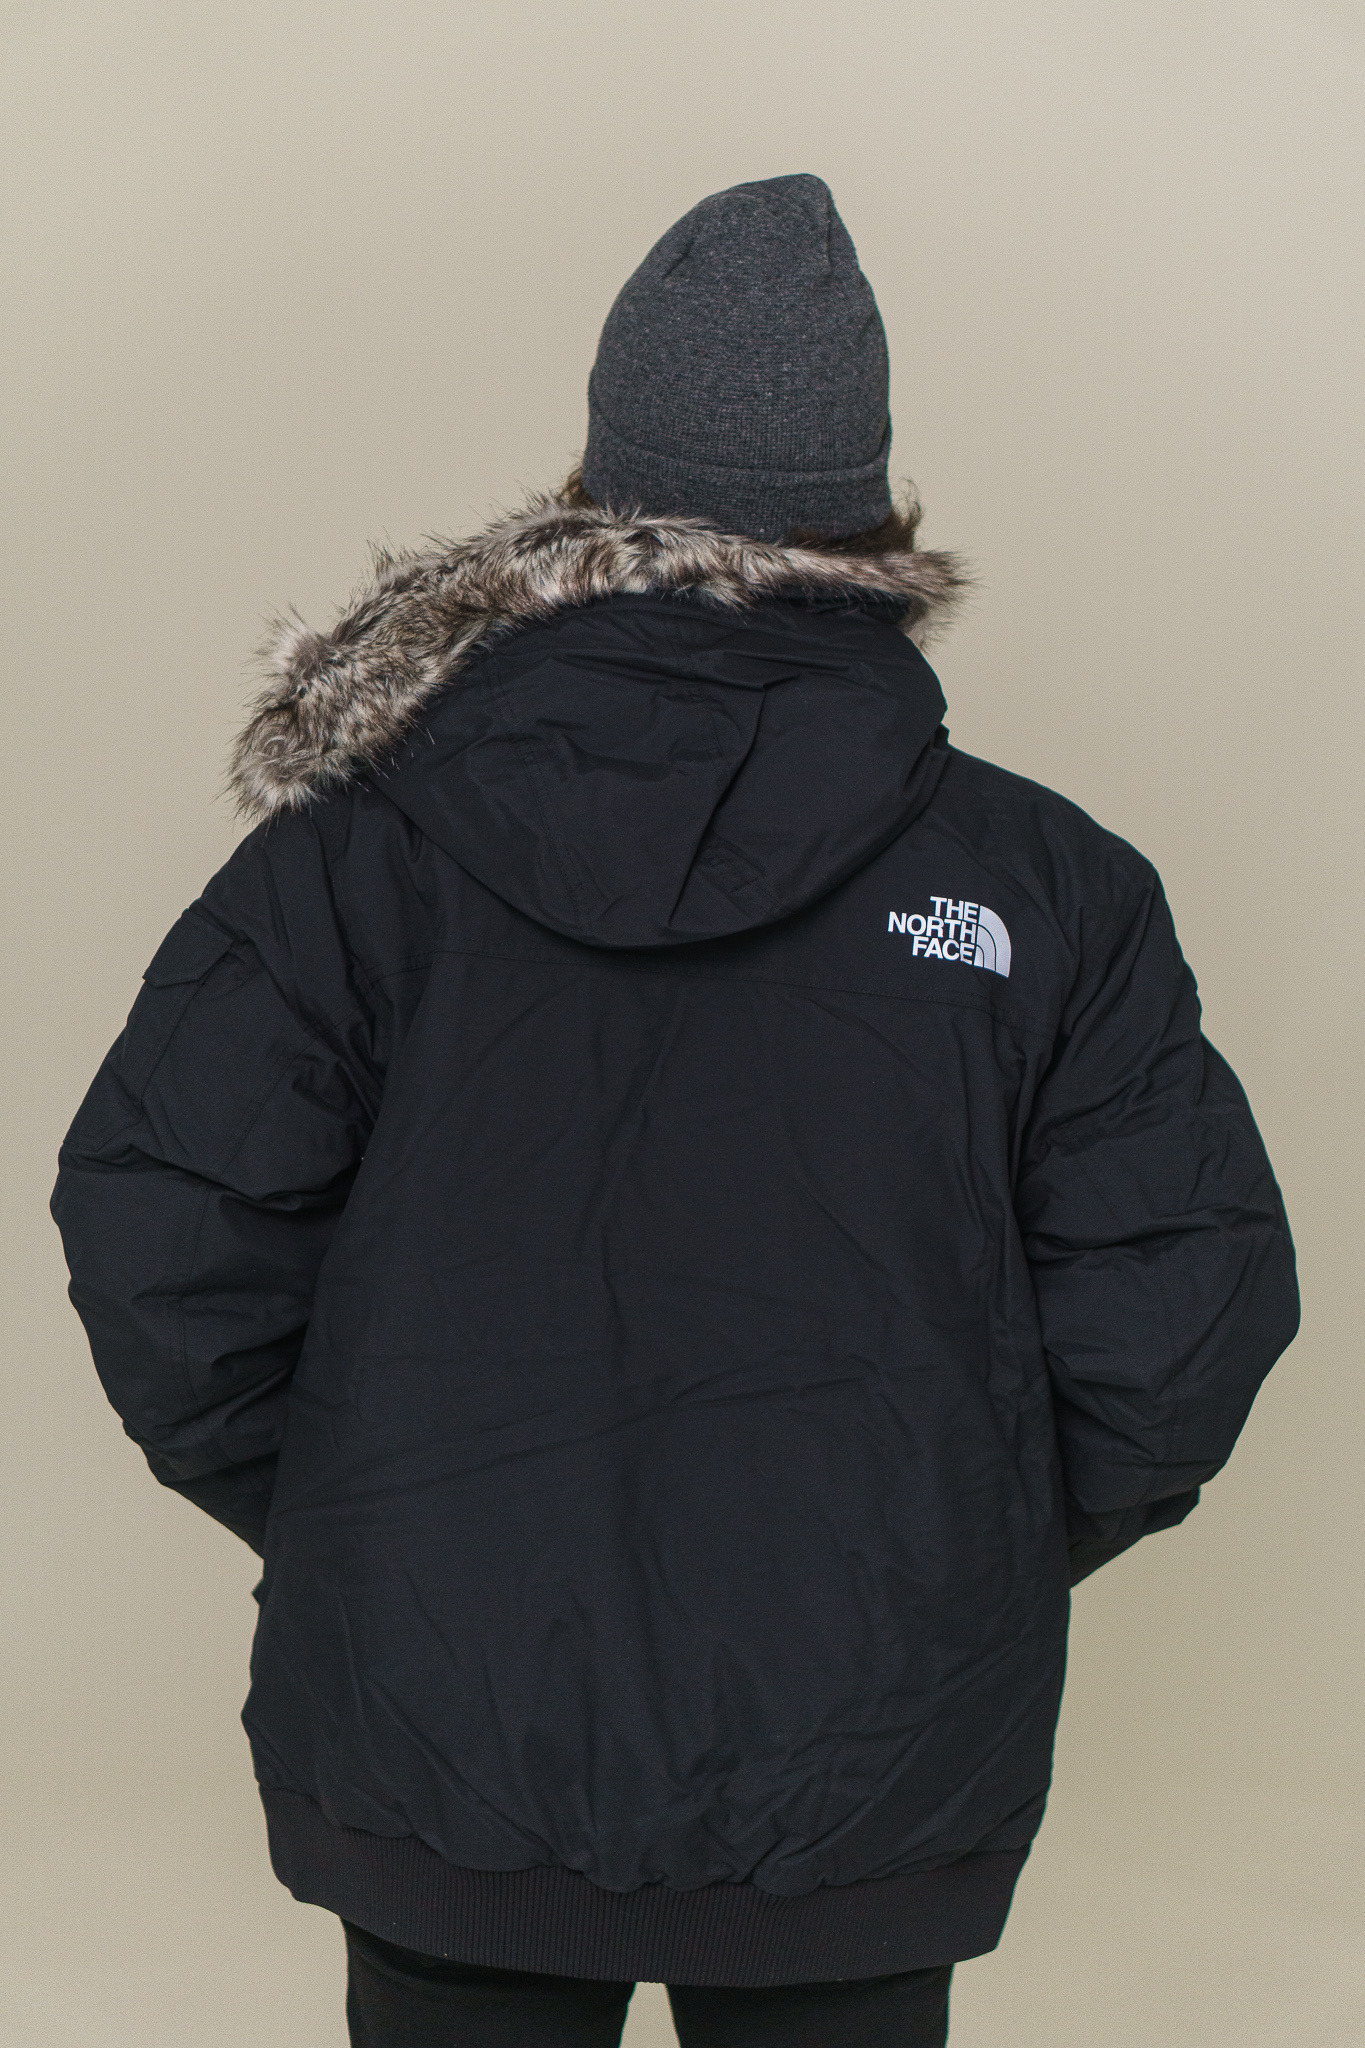 The North Face Gotham Jacket 'Black' - Top